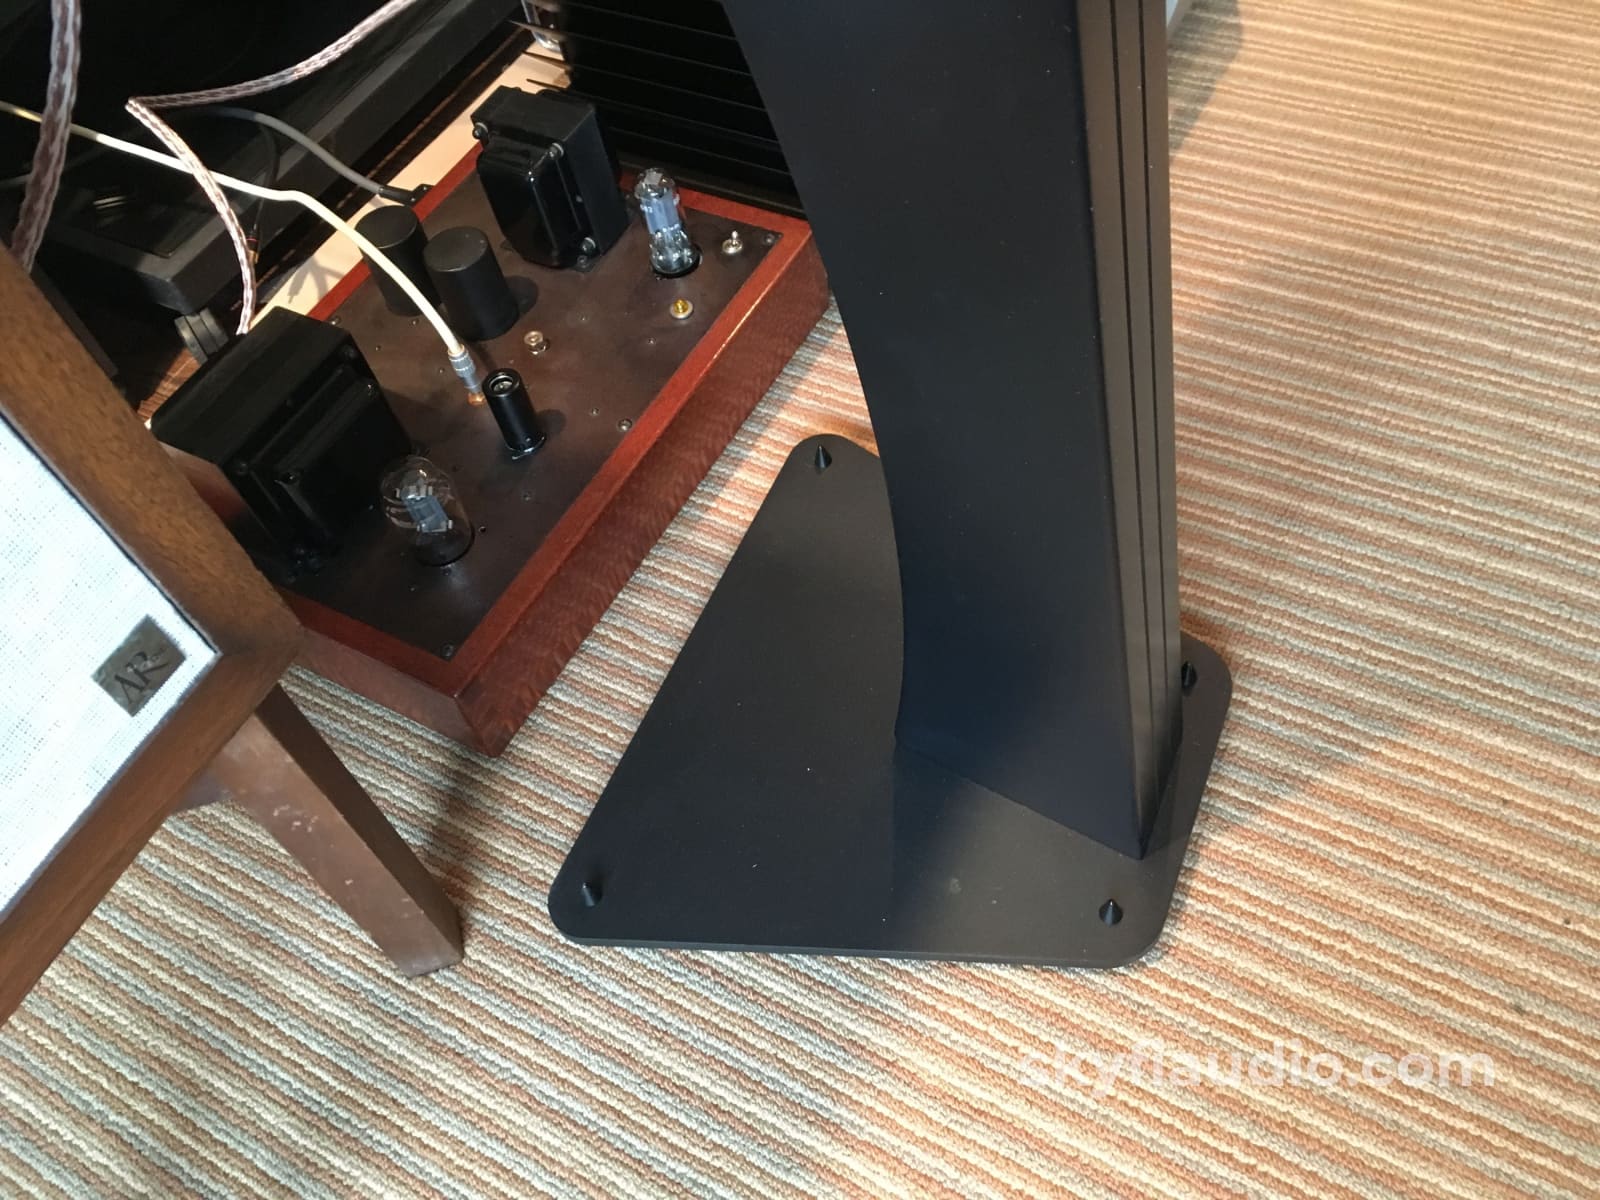 Sonus Faber Concertino Domus Speakers With Matching Stands